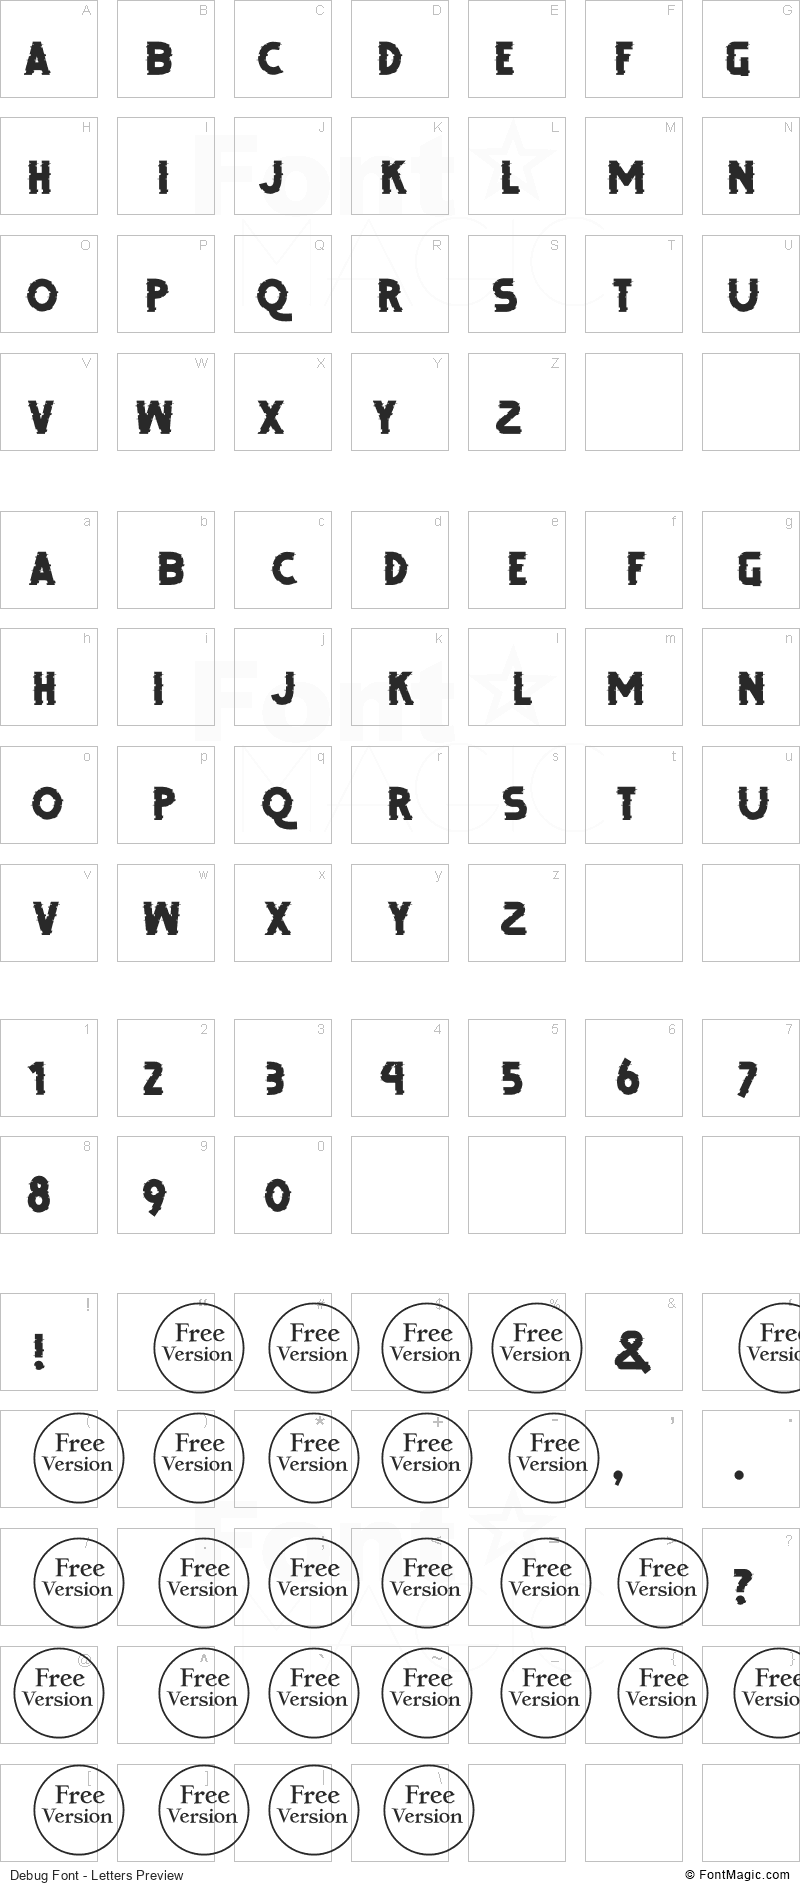 Debug Font - All Latters Preview Chart